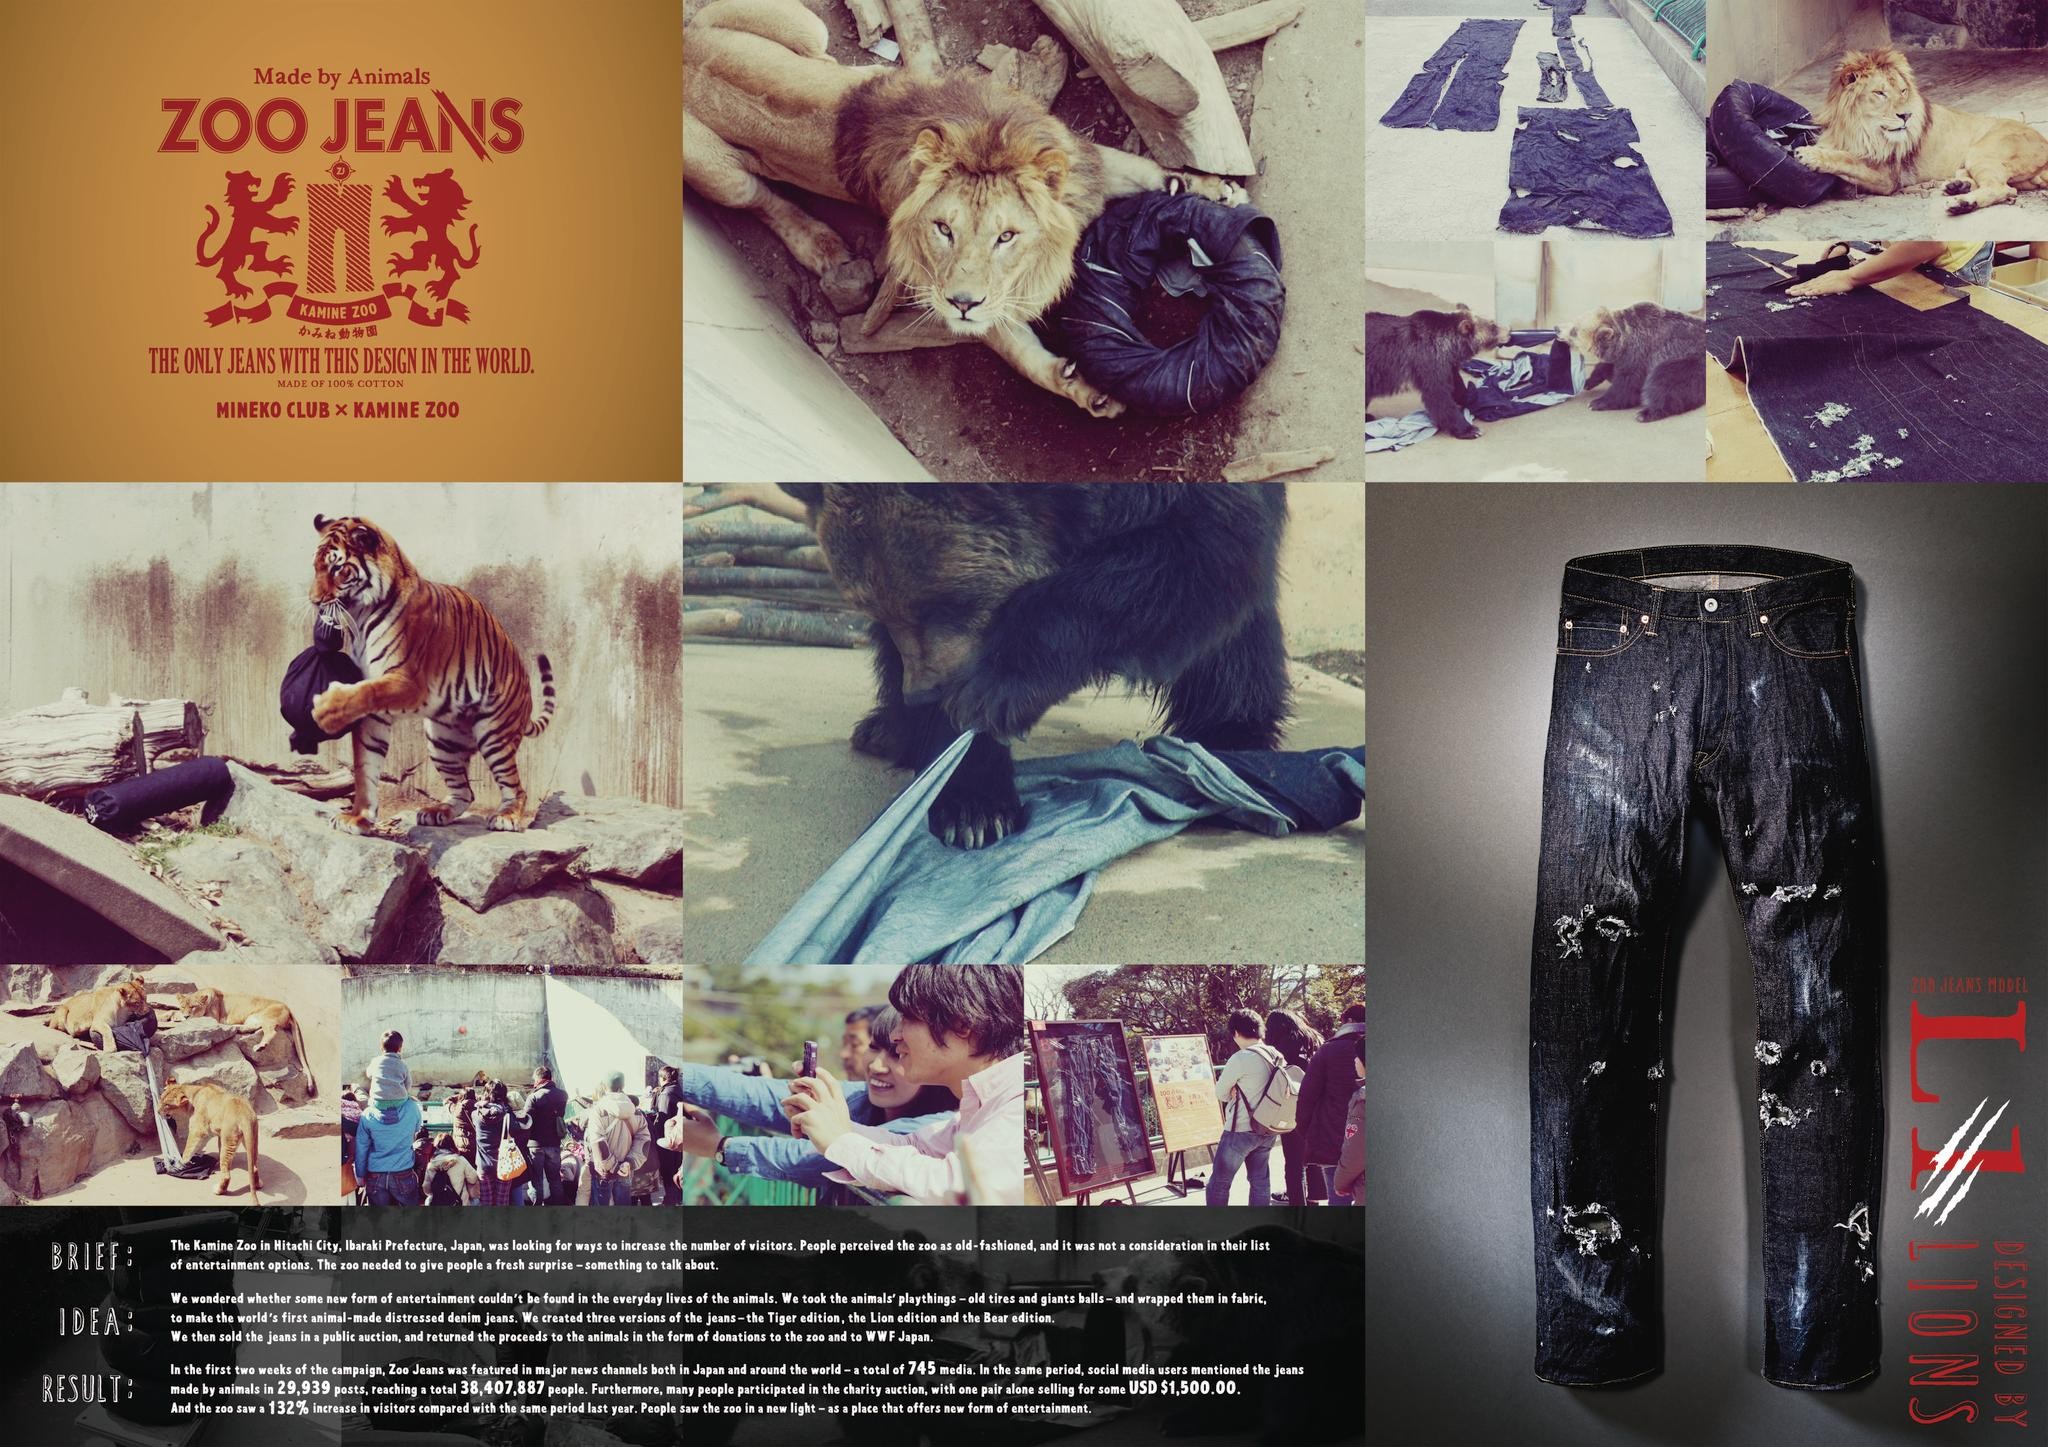 ZOO JEANS